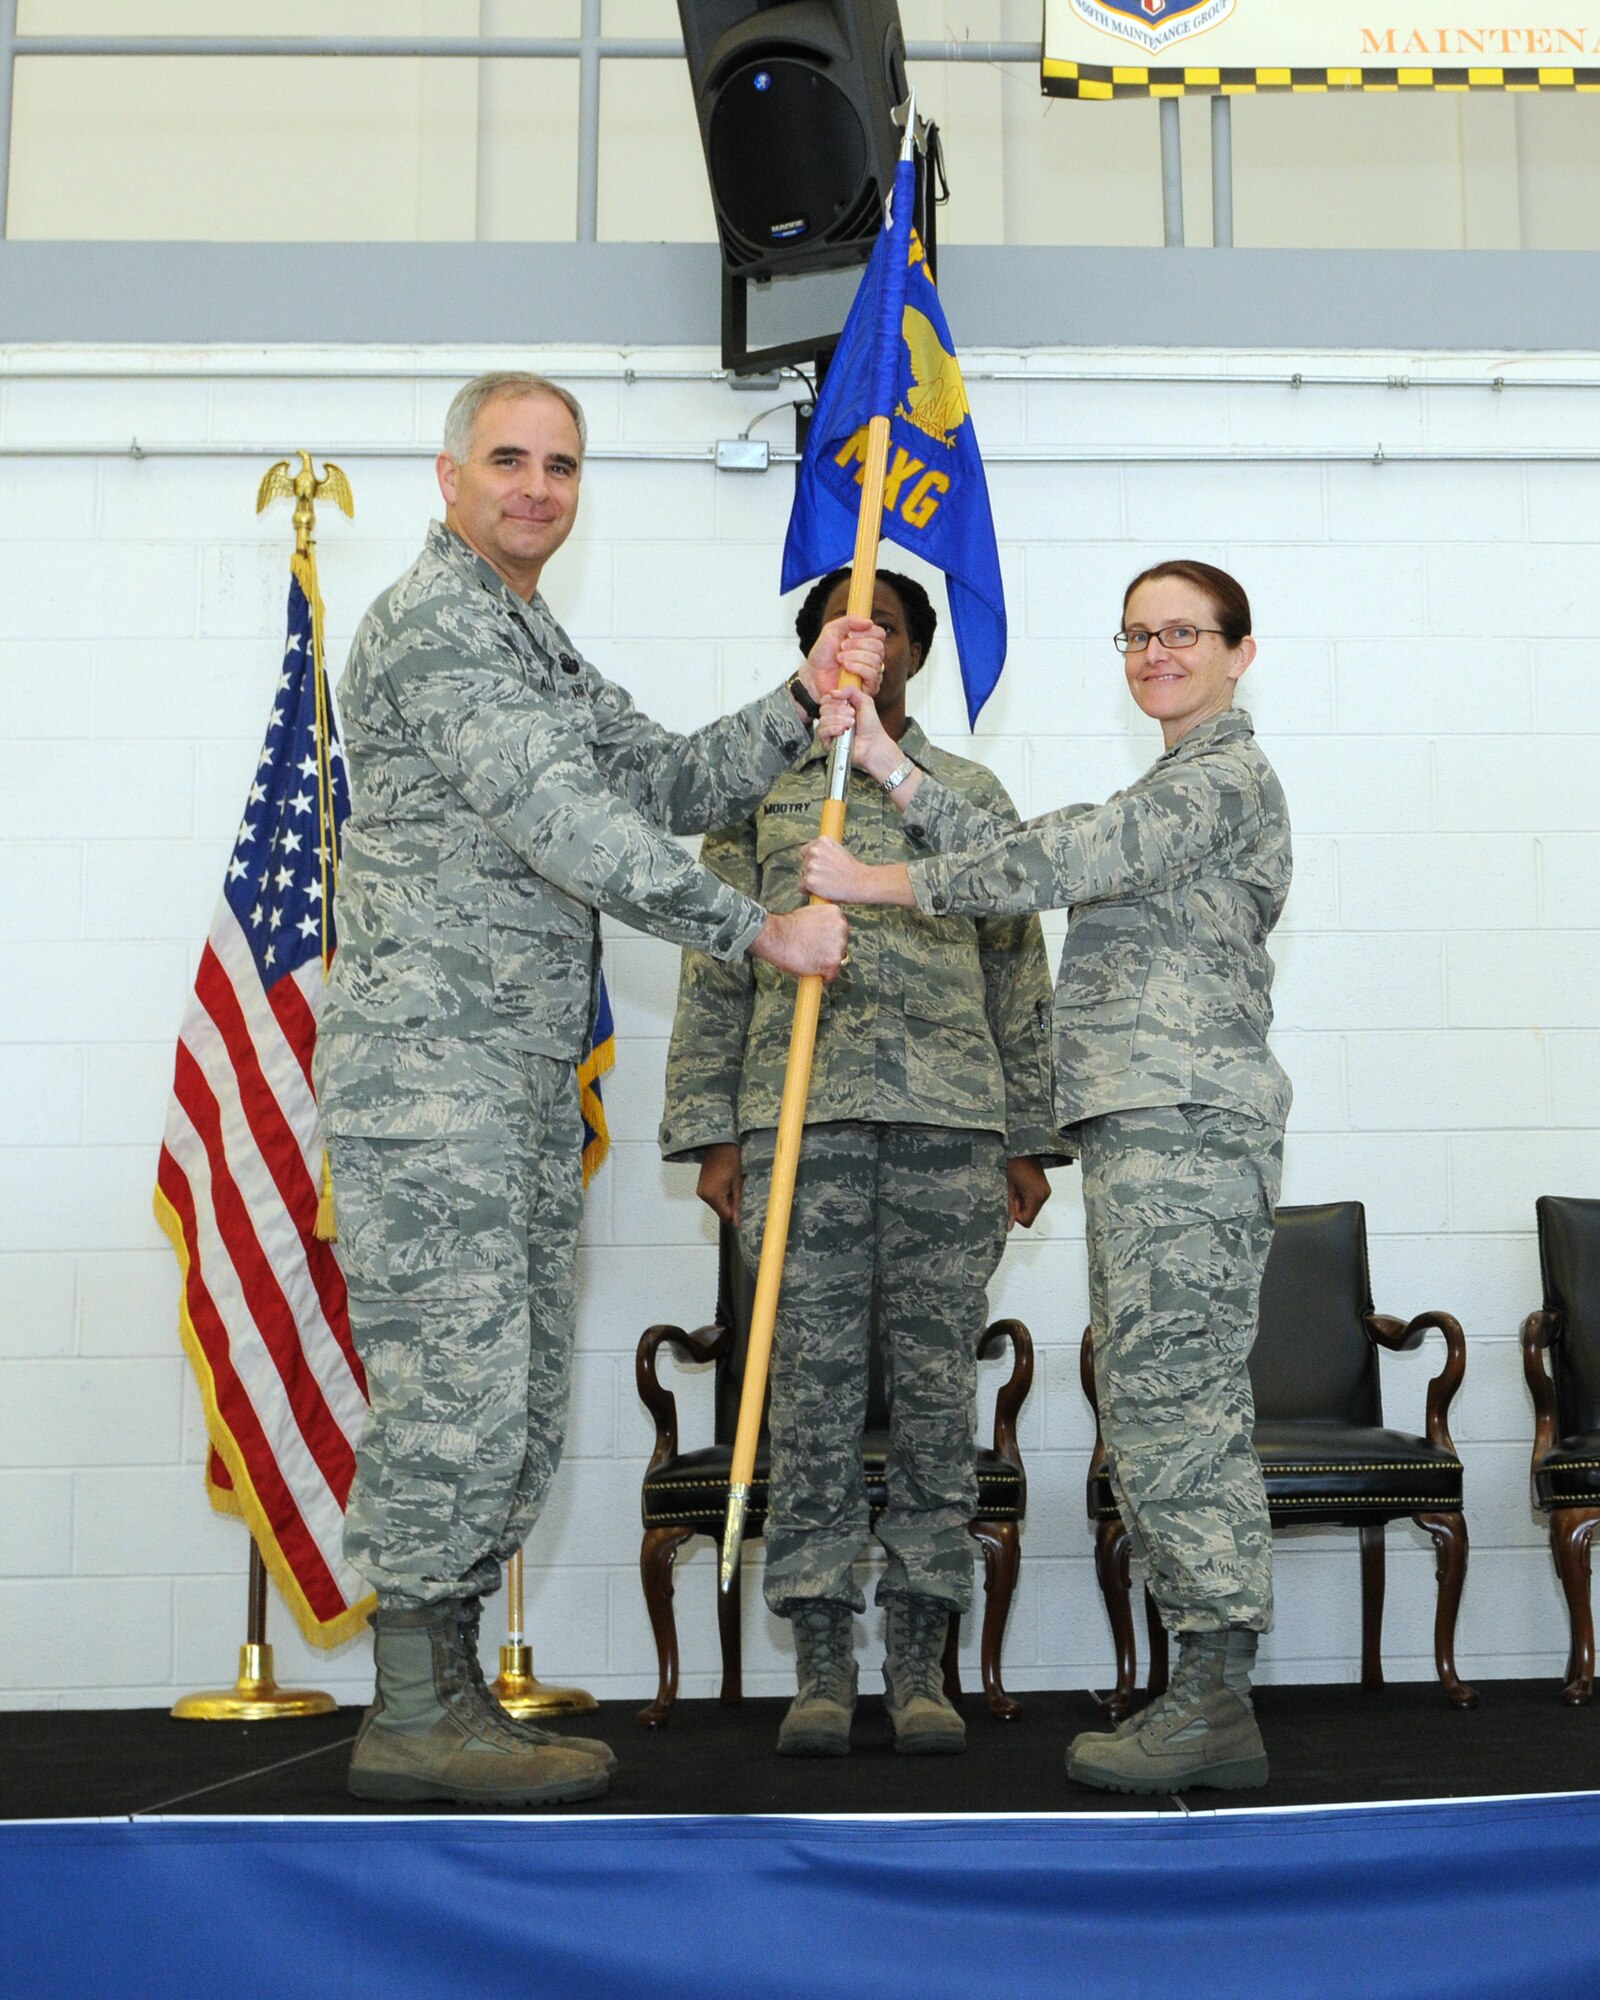 JOINT BASE ANDREWS, Md. -- Col. James M. Allman (left), 459th Air Refueling Wing commander, passes the guidon to Col. Maureen G. Banavige in a change of command ceremony here Feb. 6. Colonel Banavige assumes command of the 459th Maintenance Group after serving previously as an Individual Mobilization Augmentee to the Chief, Logistics Operations Division, Directorate of Logistics, Air Mobility Command, Scott Air Force Base, Ill. (U.S. Air Force photo/Tech. Sgt. Steve Lewis)